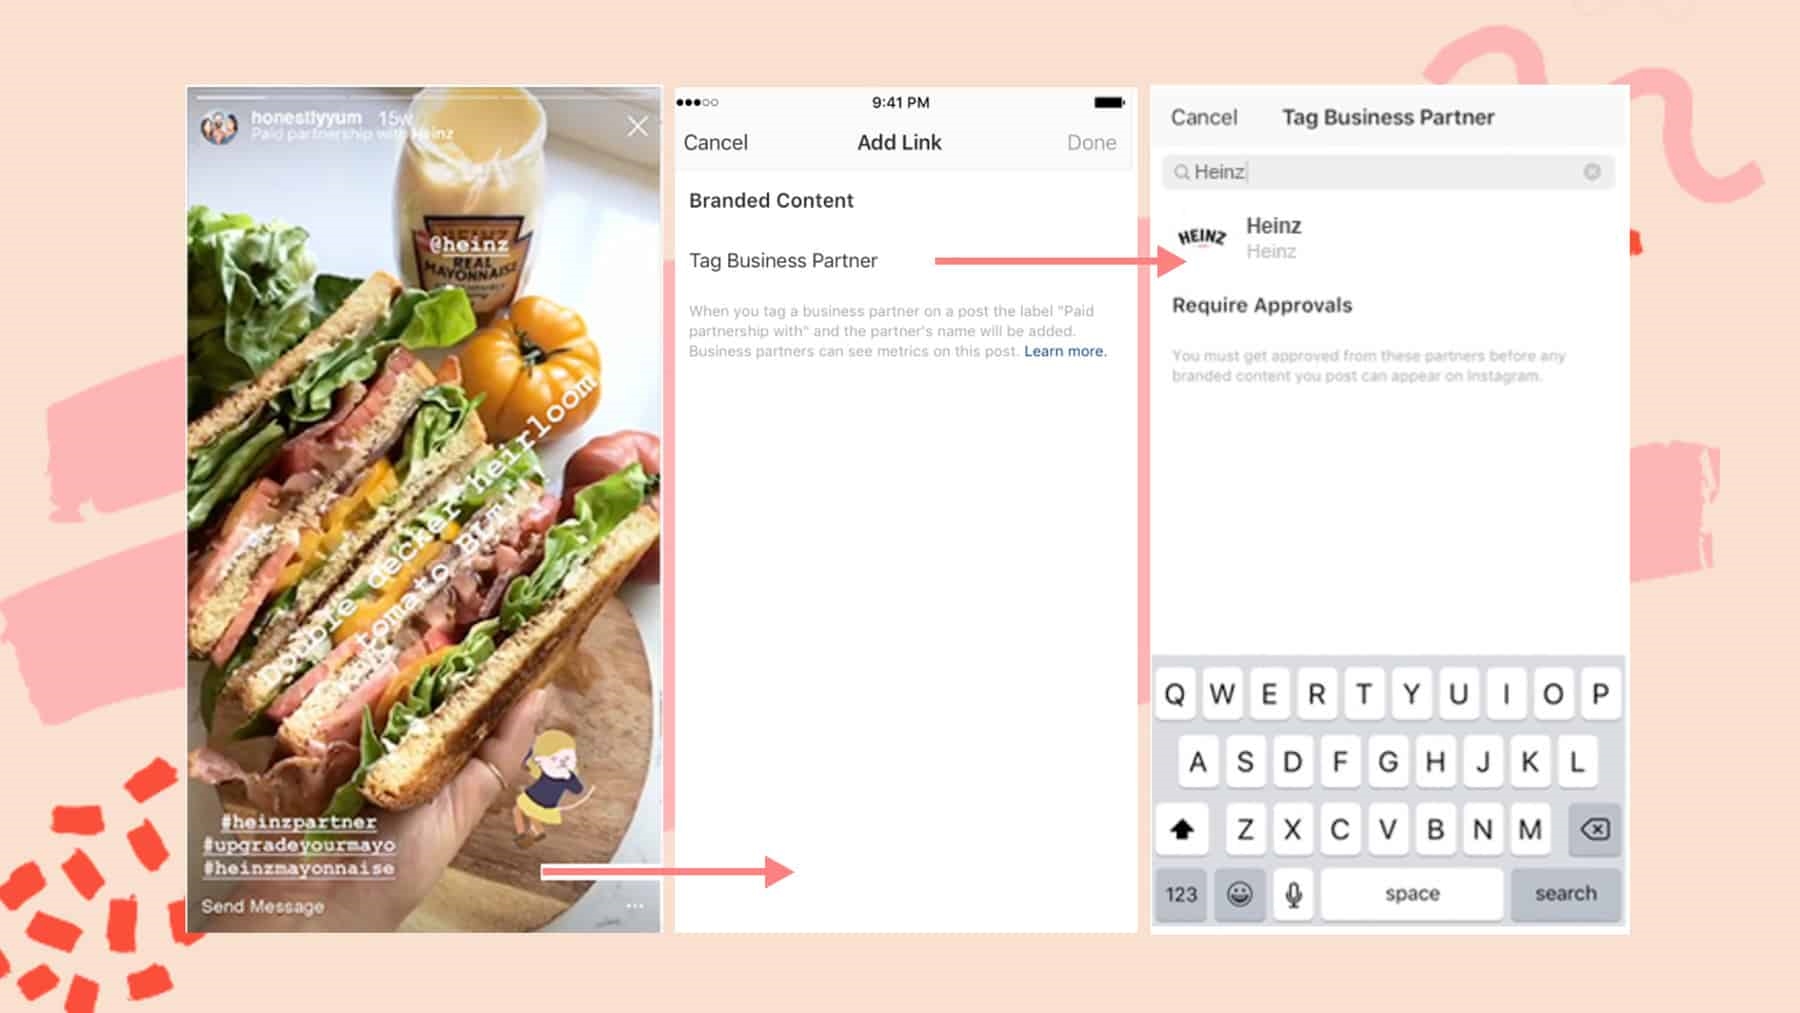 How and Why to Use the Paid Partnership Feature on Instagram